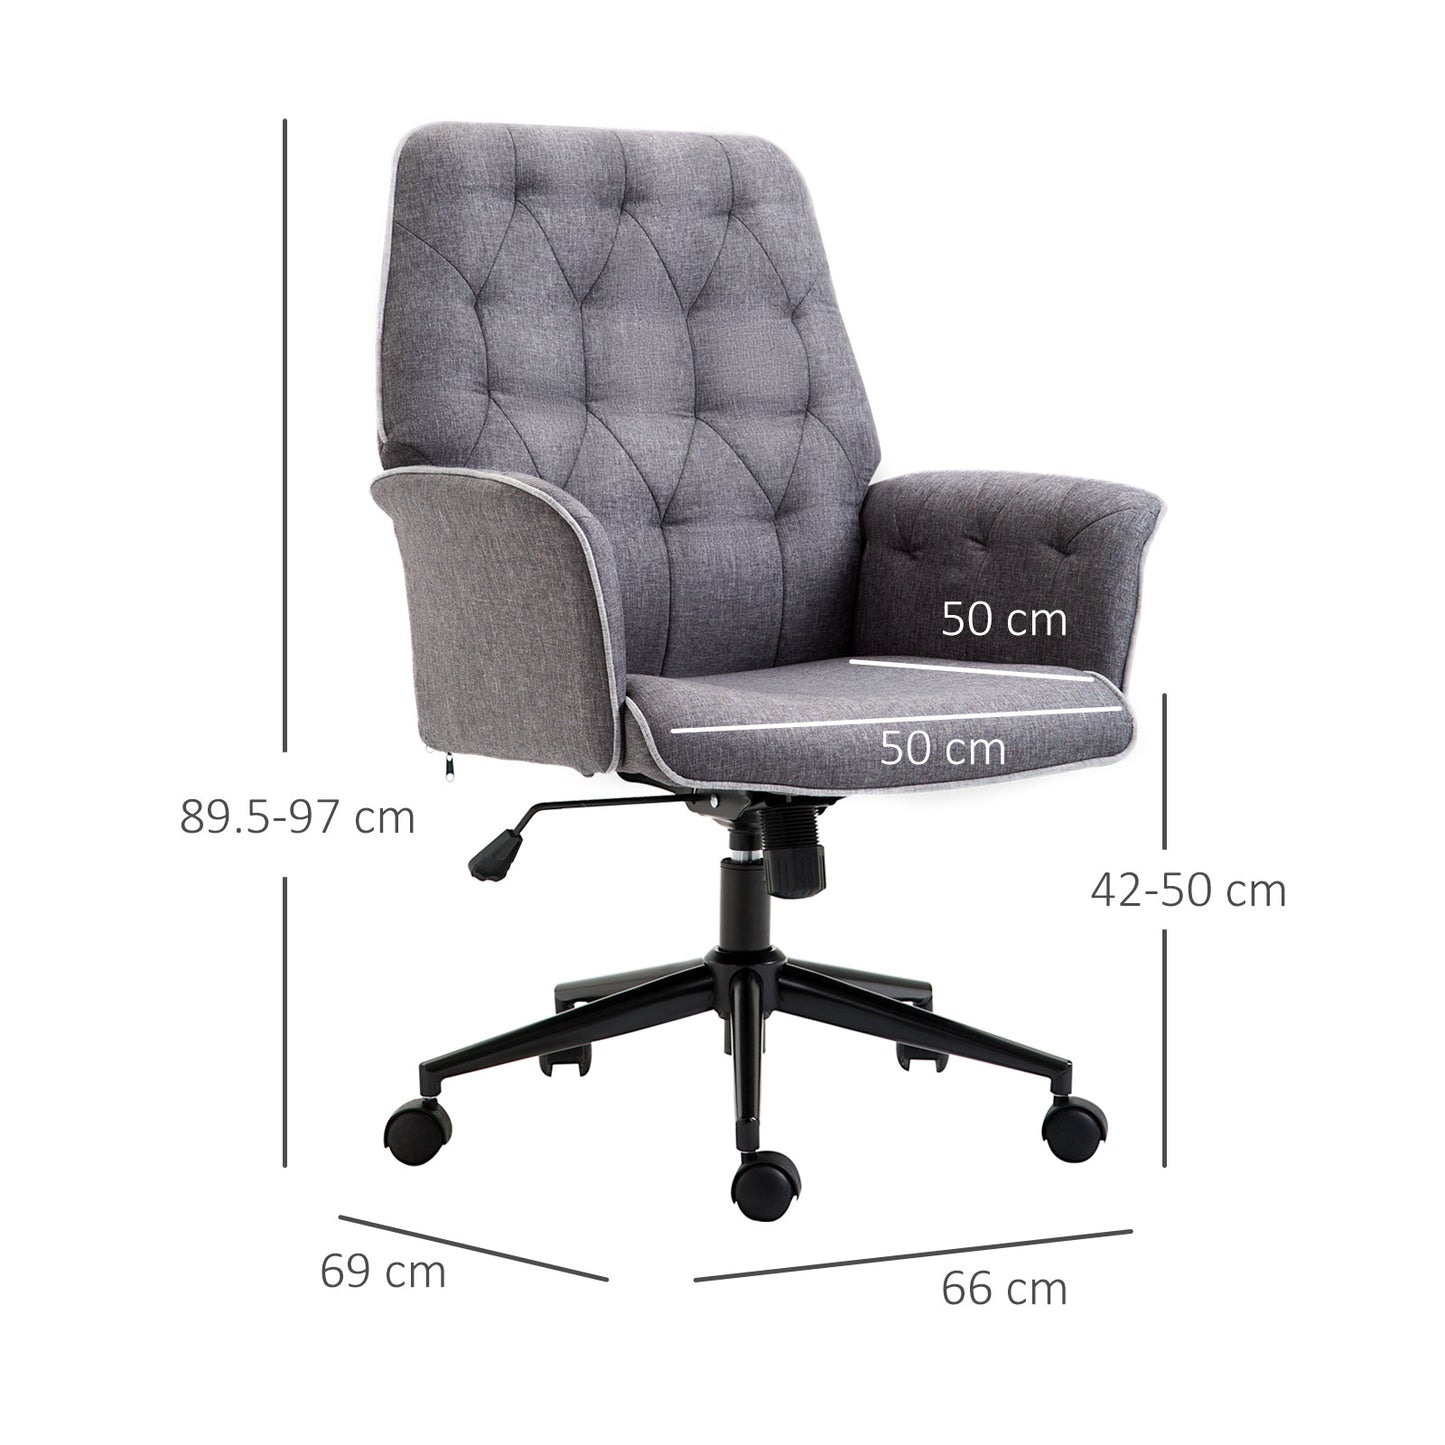 HOMCOM Linen-Feel Fabric Office Swivel Chair Mid Back Computer Desk Chair with Adjustable Seat, Arm - Grey